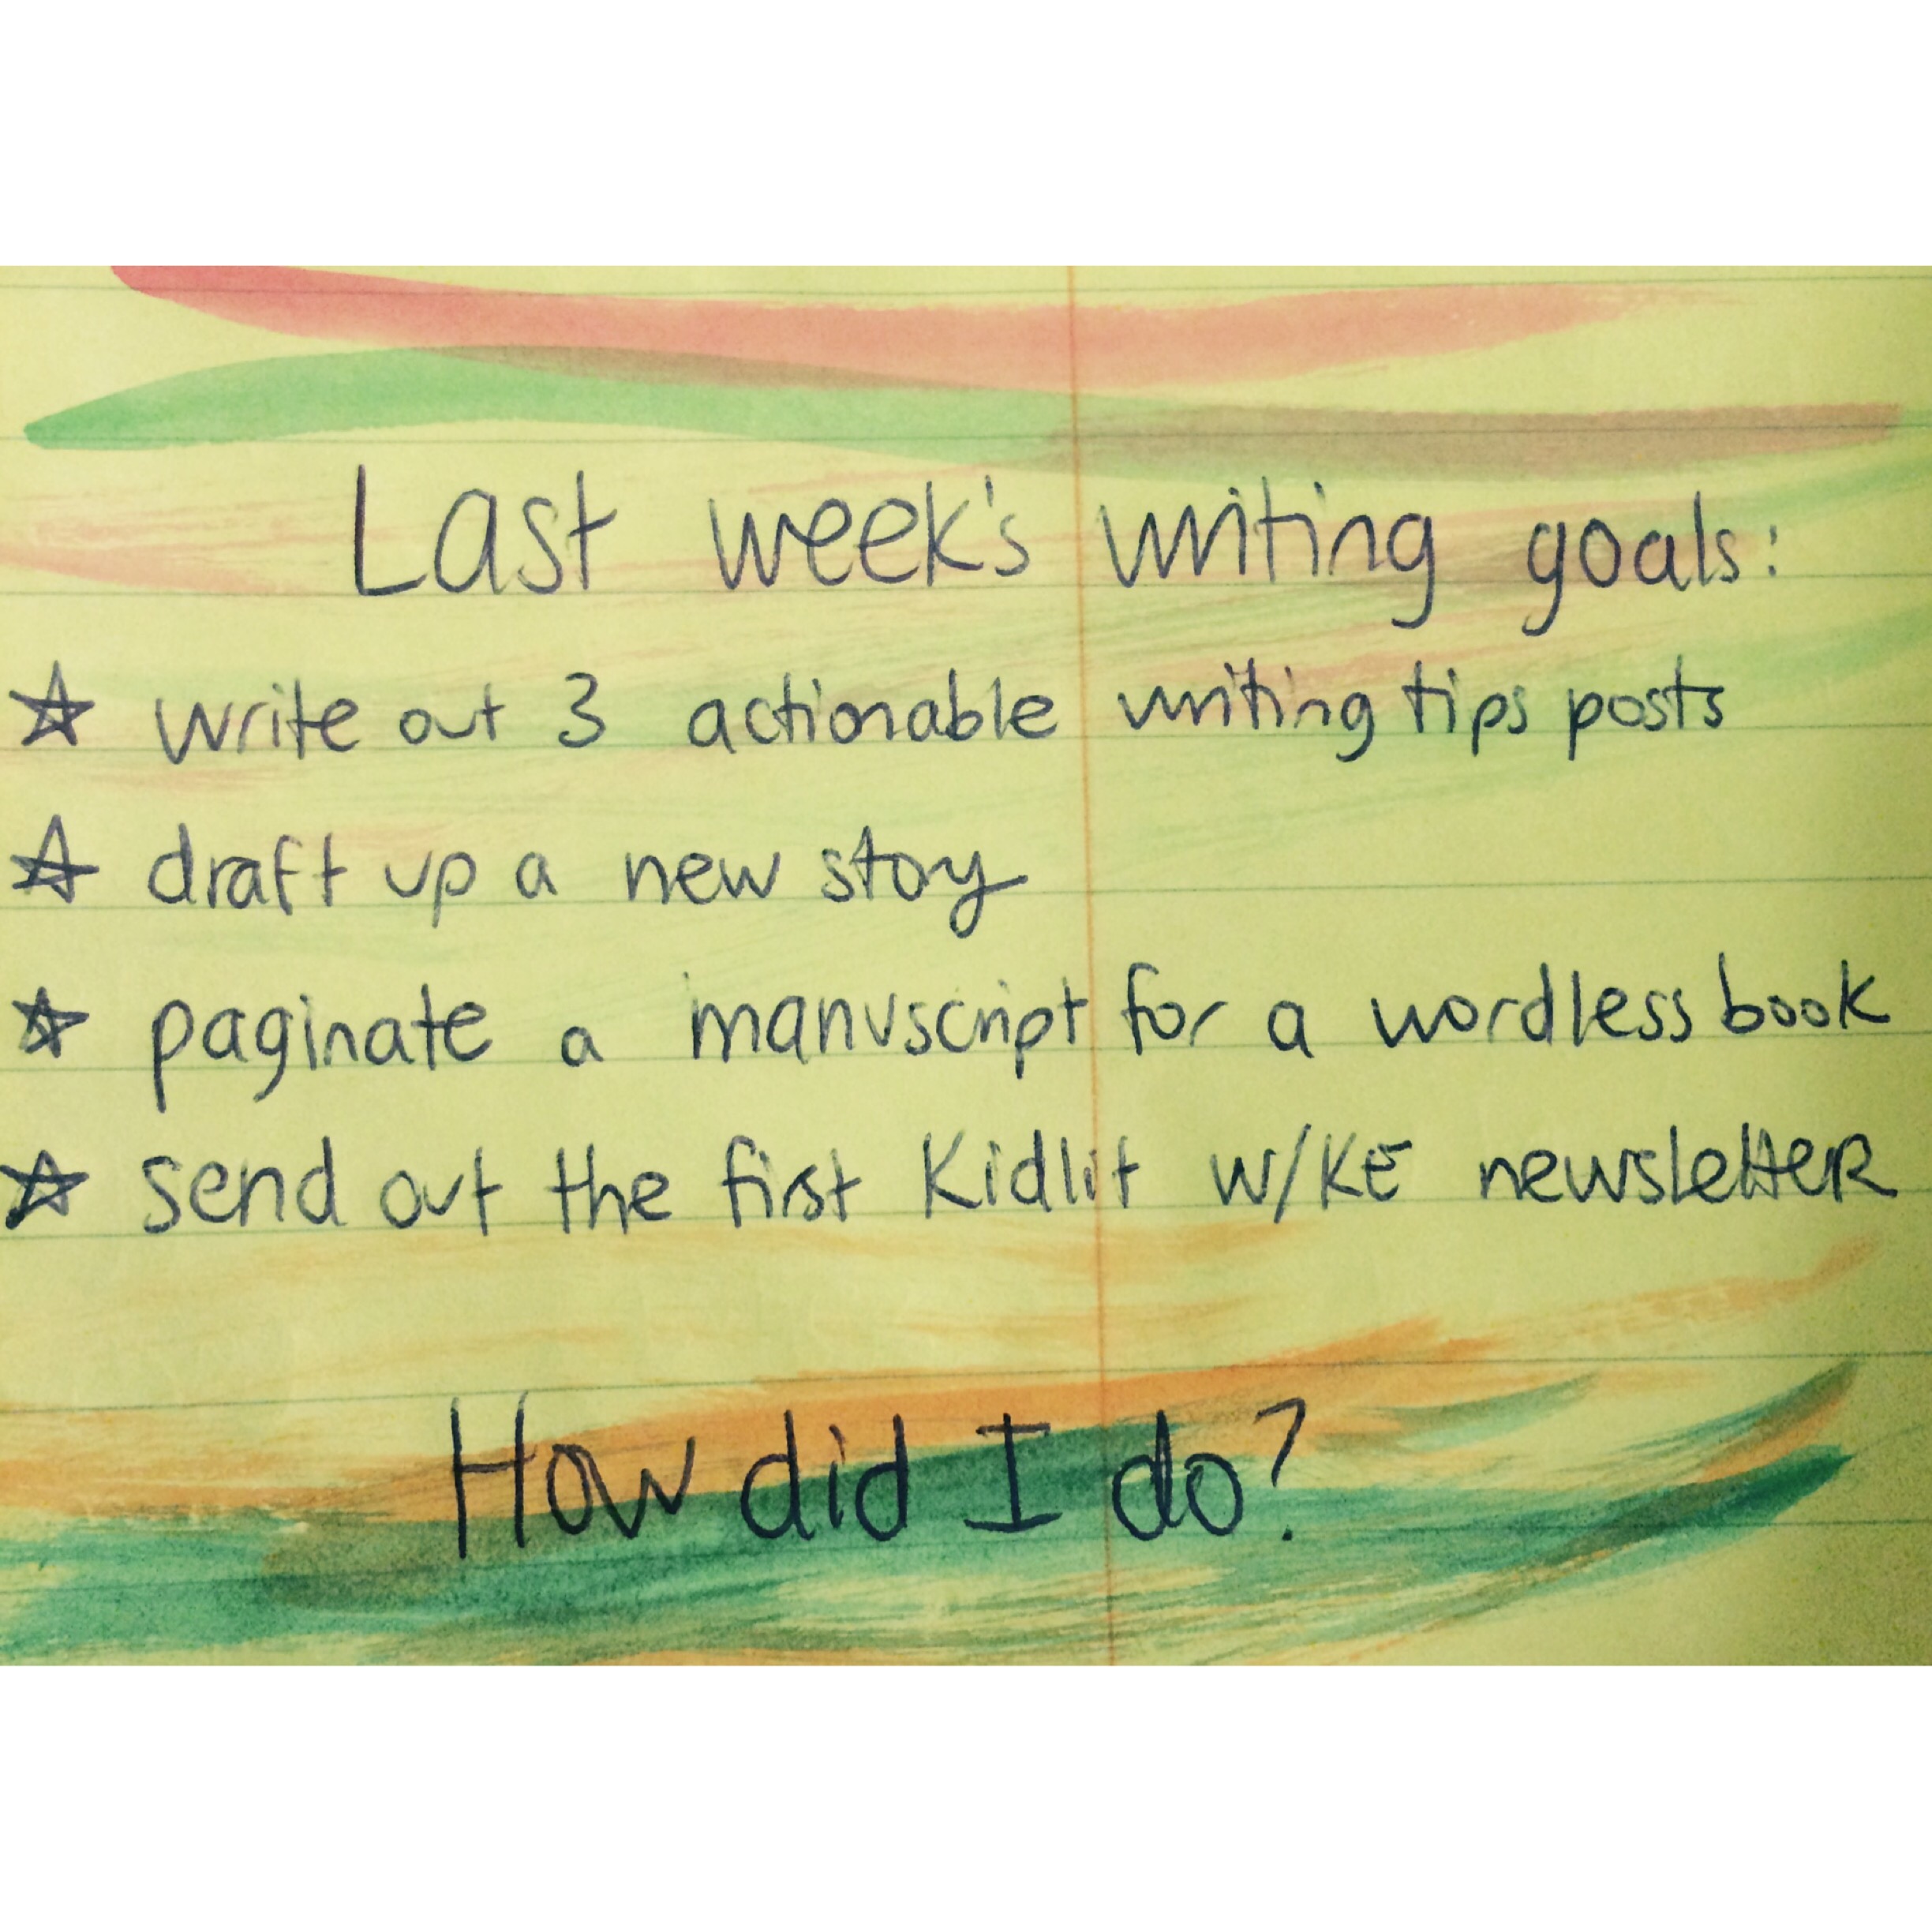 Writing Check in #2: This week in writing.